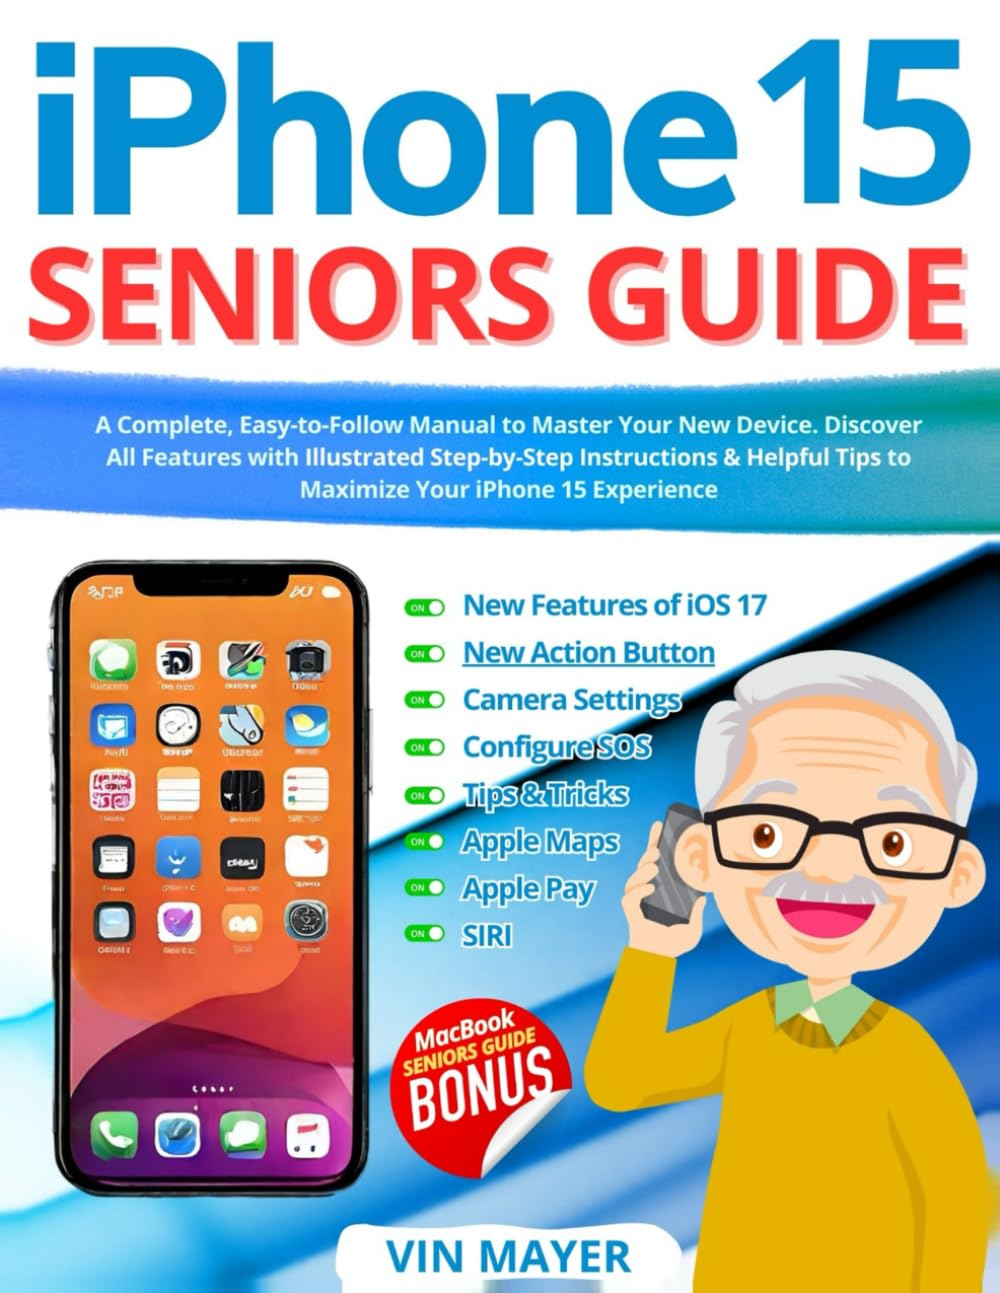 iPhone 15 Seniors Guide: A Complete, Easy-to-Follow Manual to Master Your New Device. Discover All Features with Illustrated Step-by-Step Instructions & Helpful Tips to Maximize Your iPhone Experience